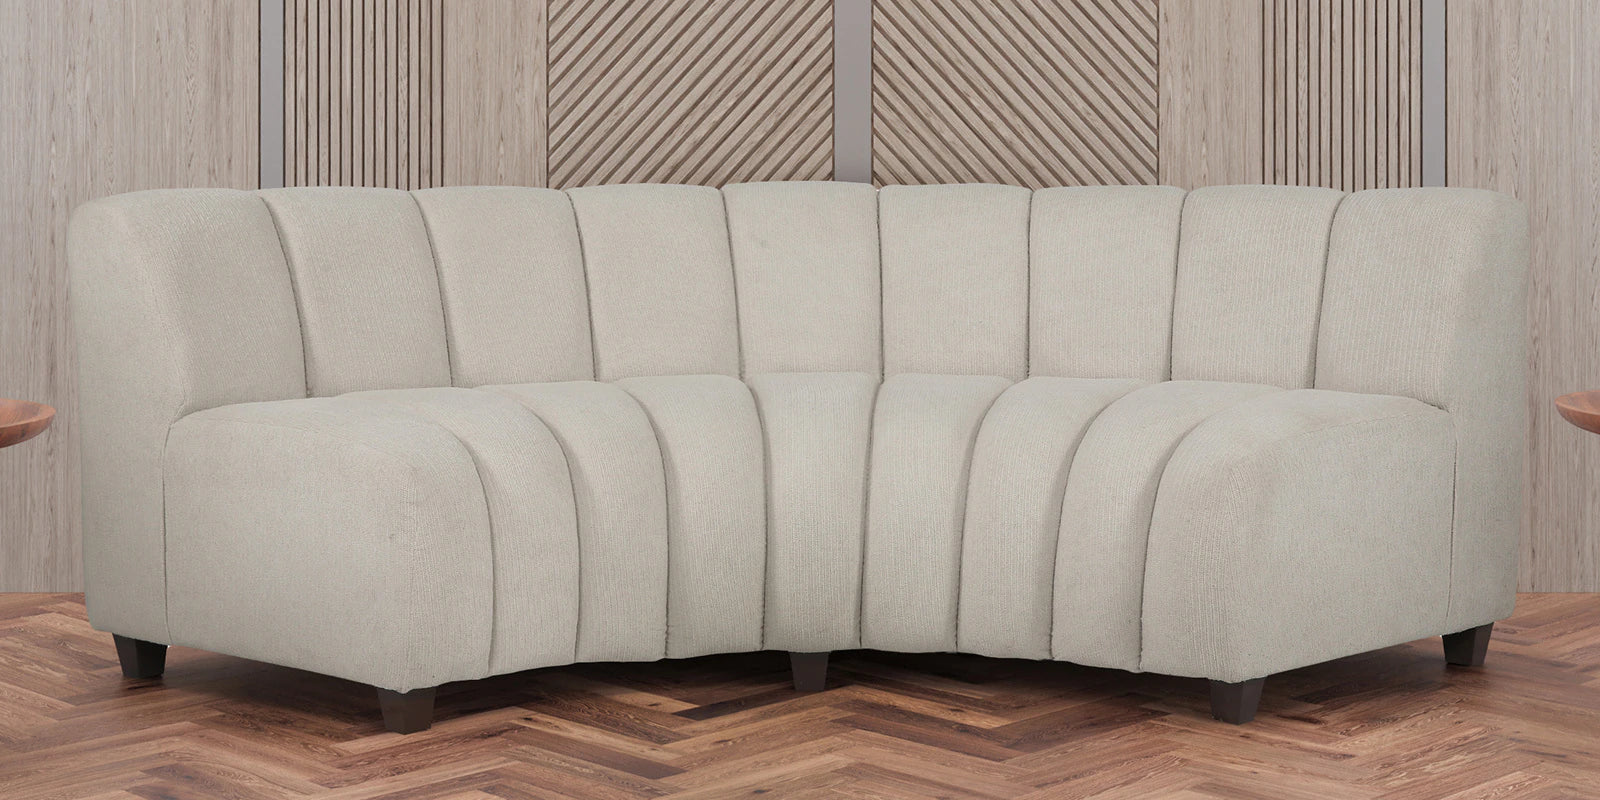 Boucle Fabric 3 Seater Curve Shaped Sofa in Off White Colour